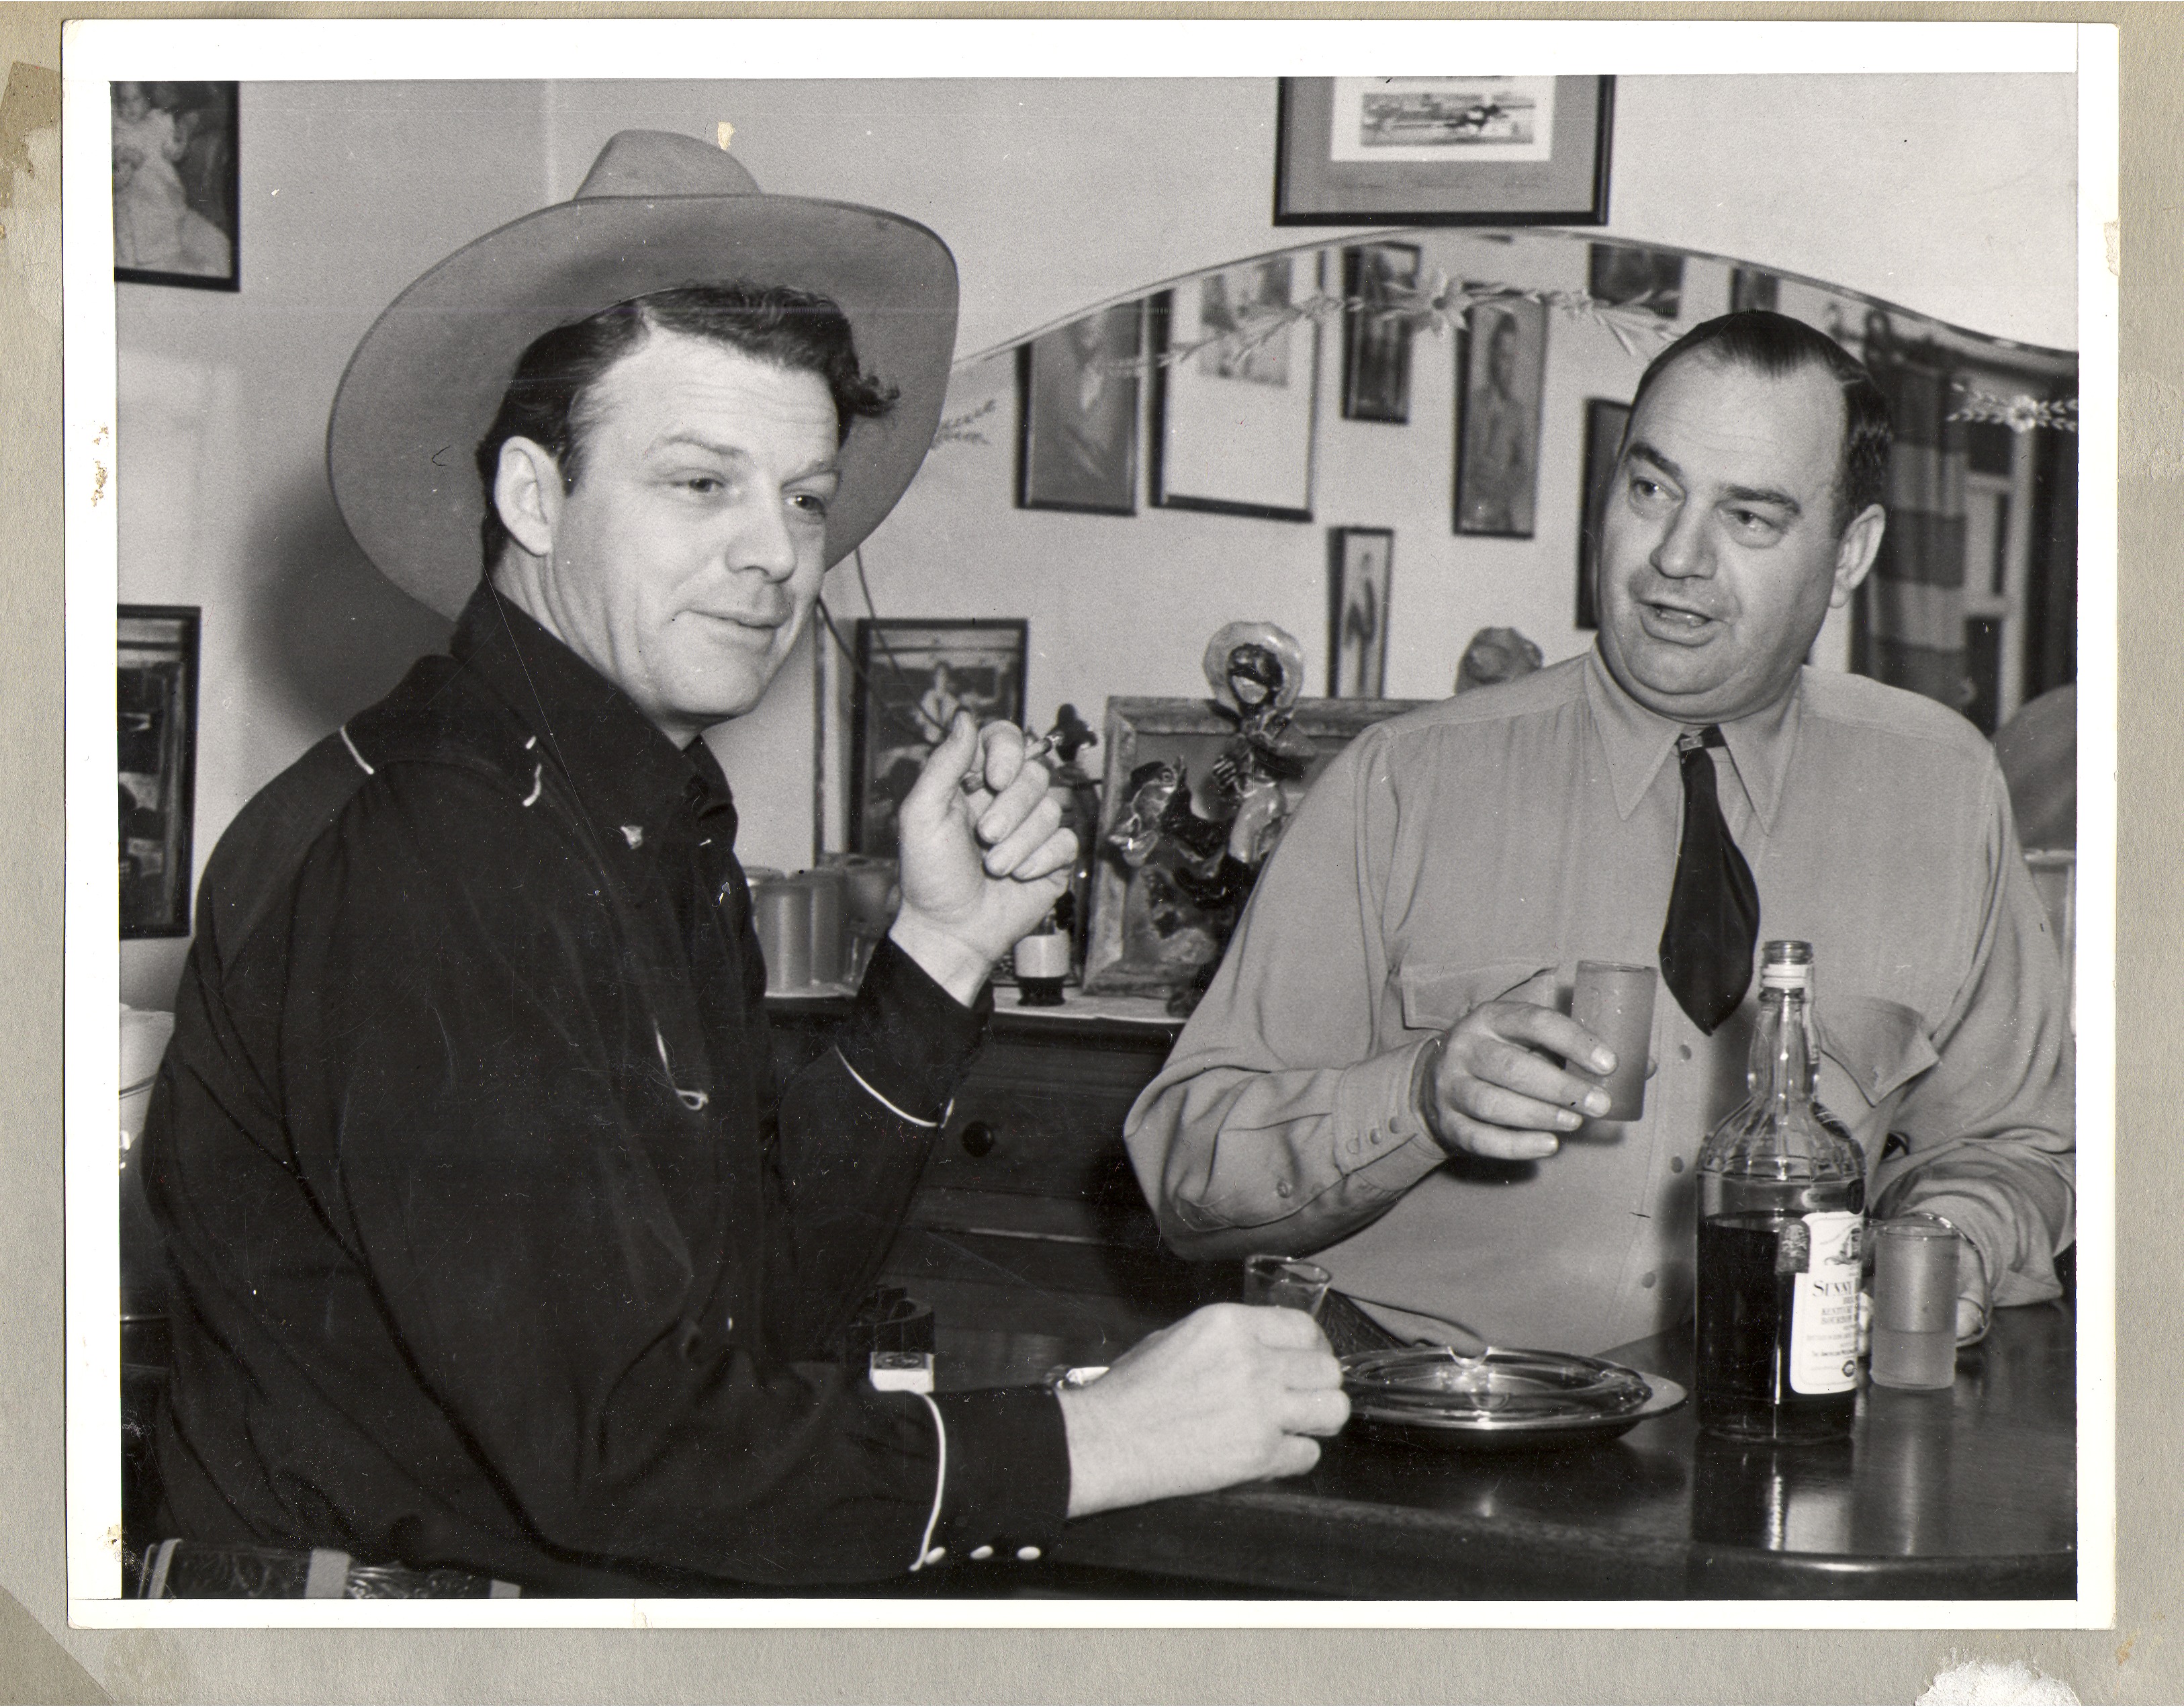 Rex Bell, left, seated at the bar with Bill Frolicki: photographic print